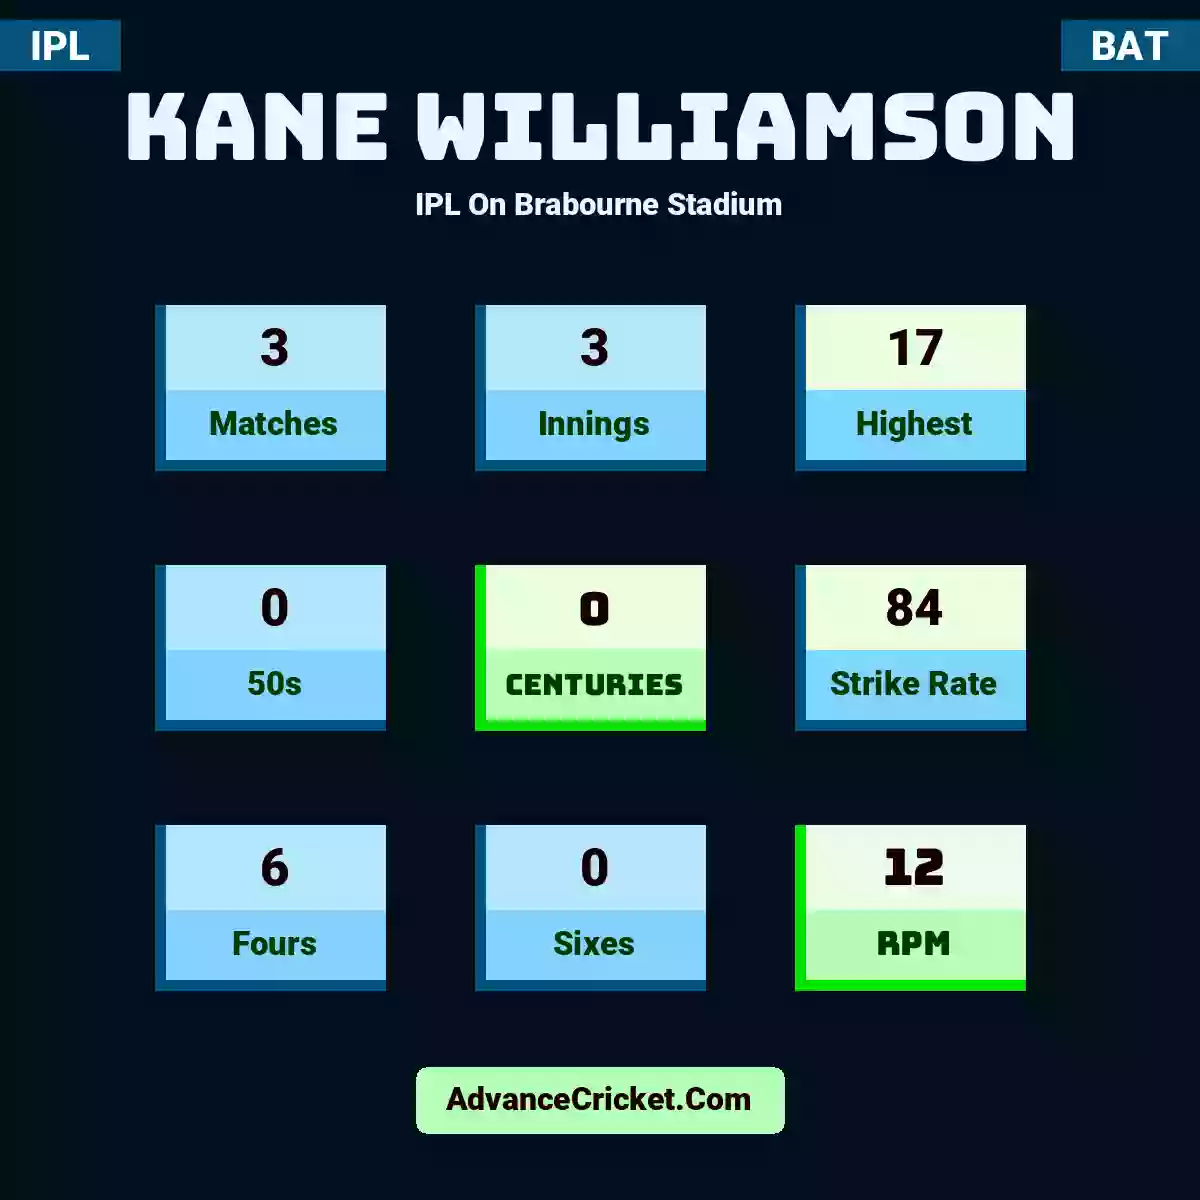 Kane Williamson IPL  On Brabourne Stadium, Kane Williamson played 3 matches, scored 17 runs as highest, 0 half-centuries, and 0 centuries, with a strike rate of 84. K.Williamson hit 6 fours and 0 sixes, with an RPM of 12.